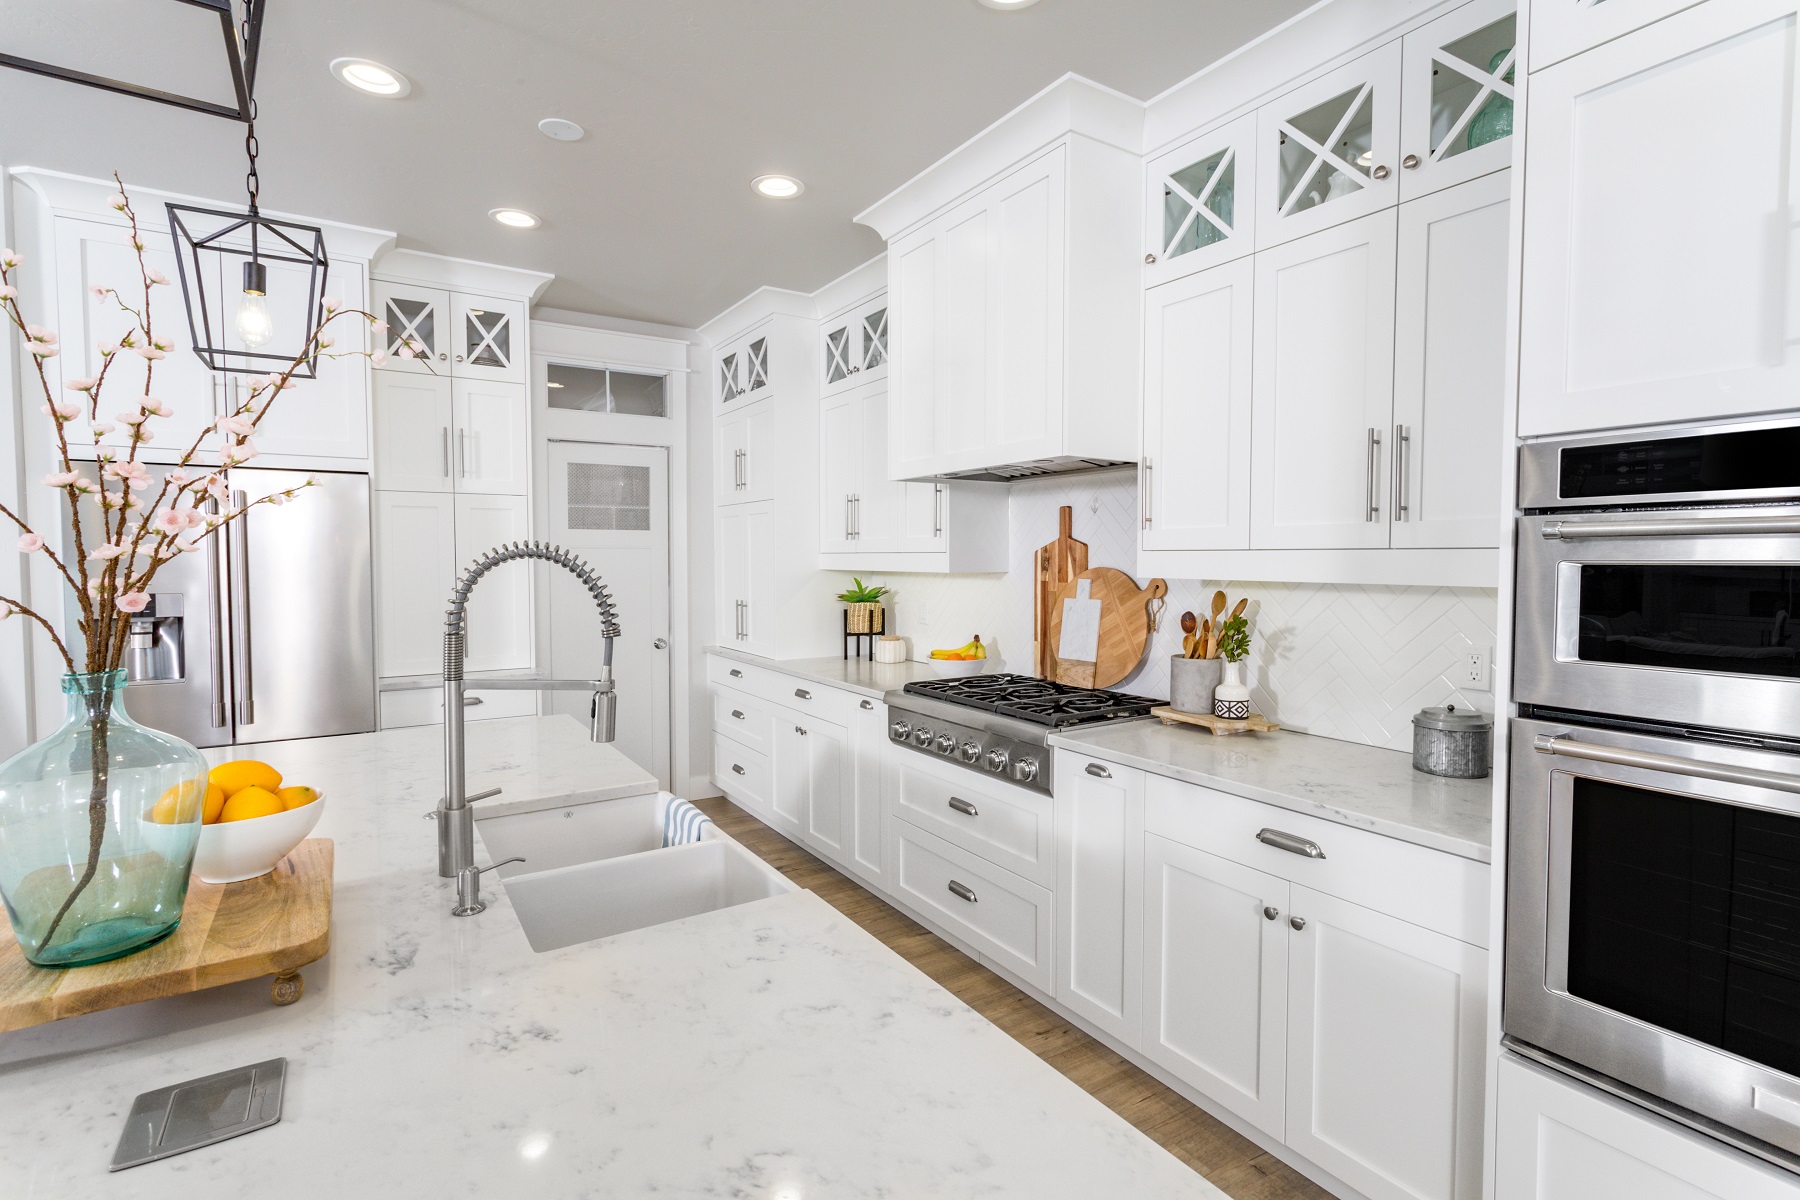 2022 Average Prices: How Much Do Marble Countertops Cost?